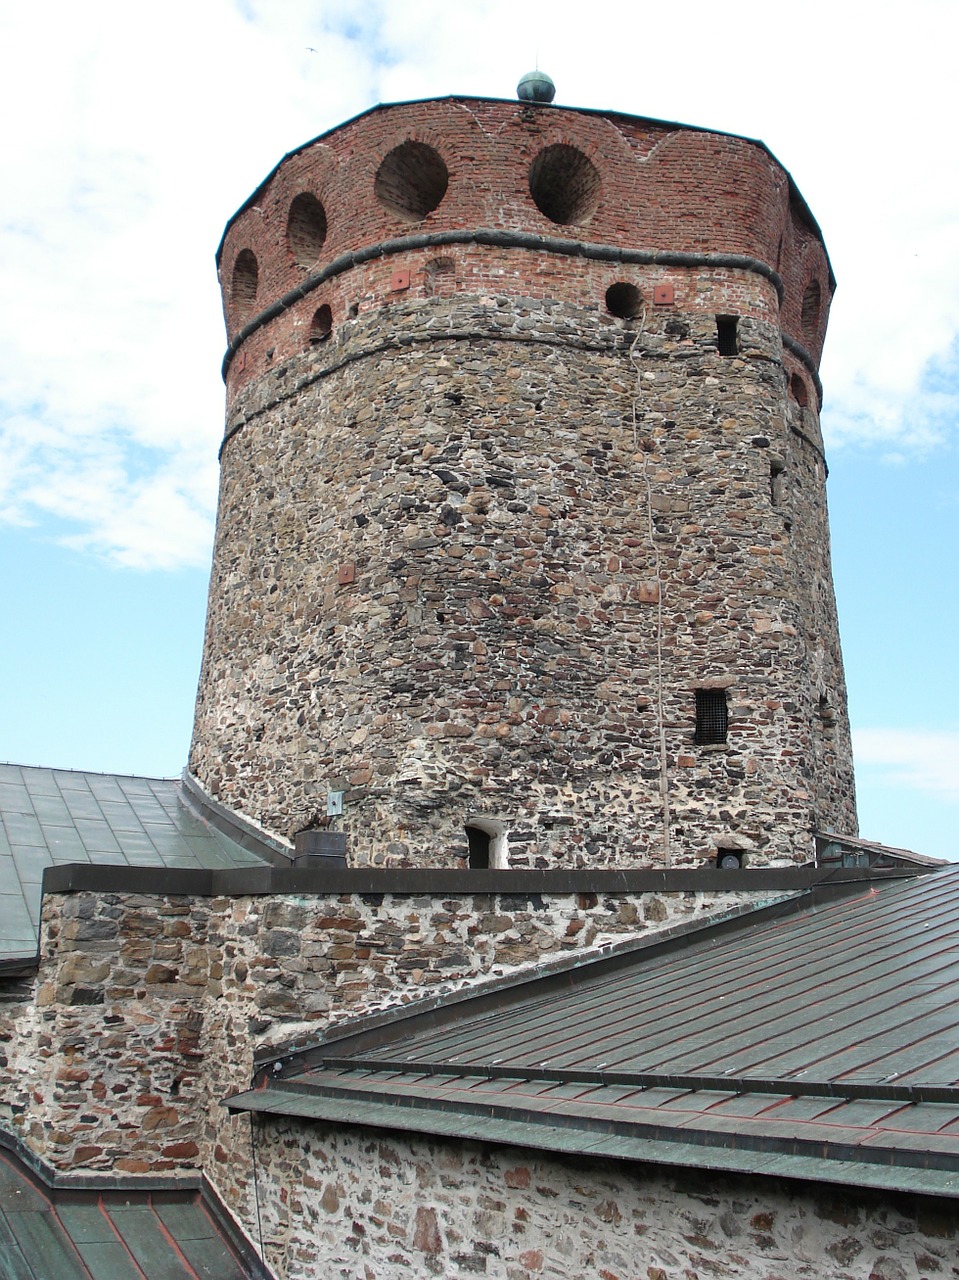 finnish olaf's castle tower free photo